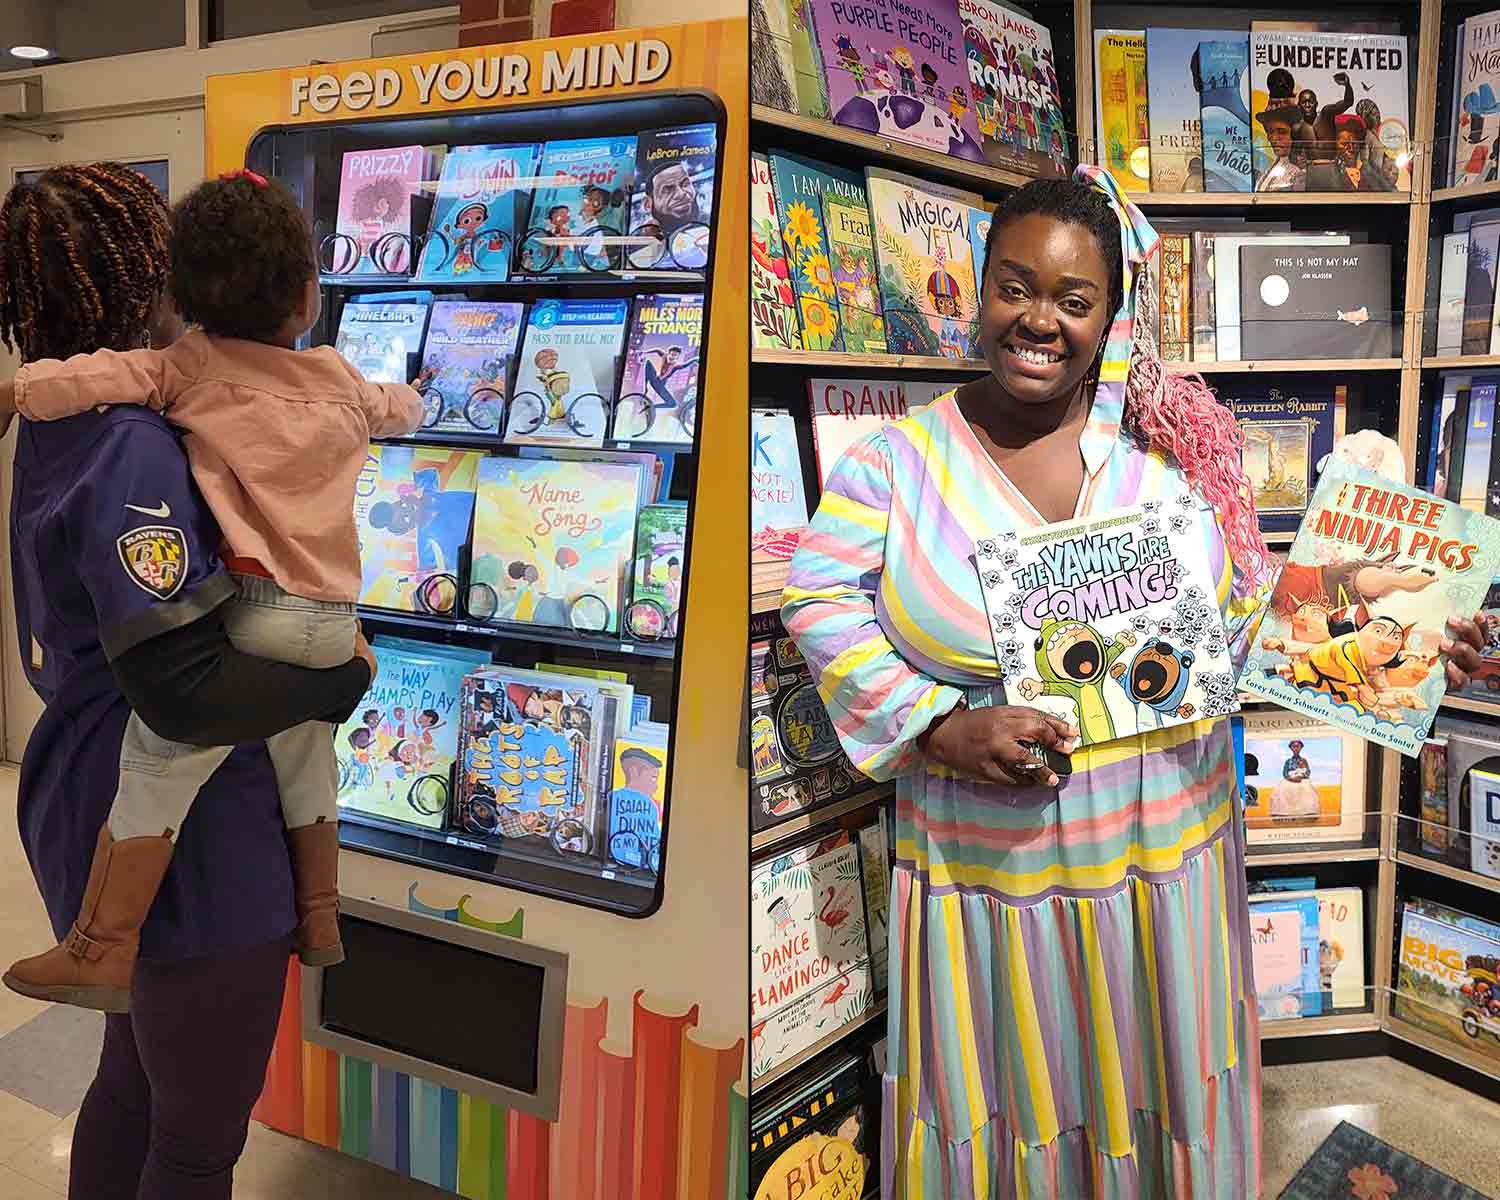 Side by side of a woman and young child looking at a book vending machine and Storybook Maze posing in front of bookshelves.